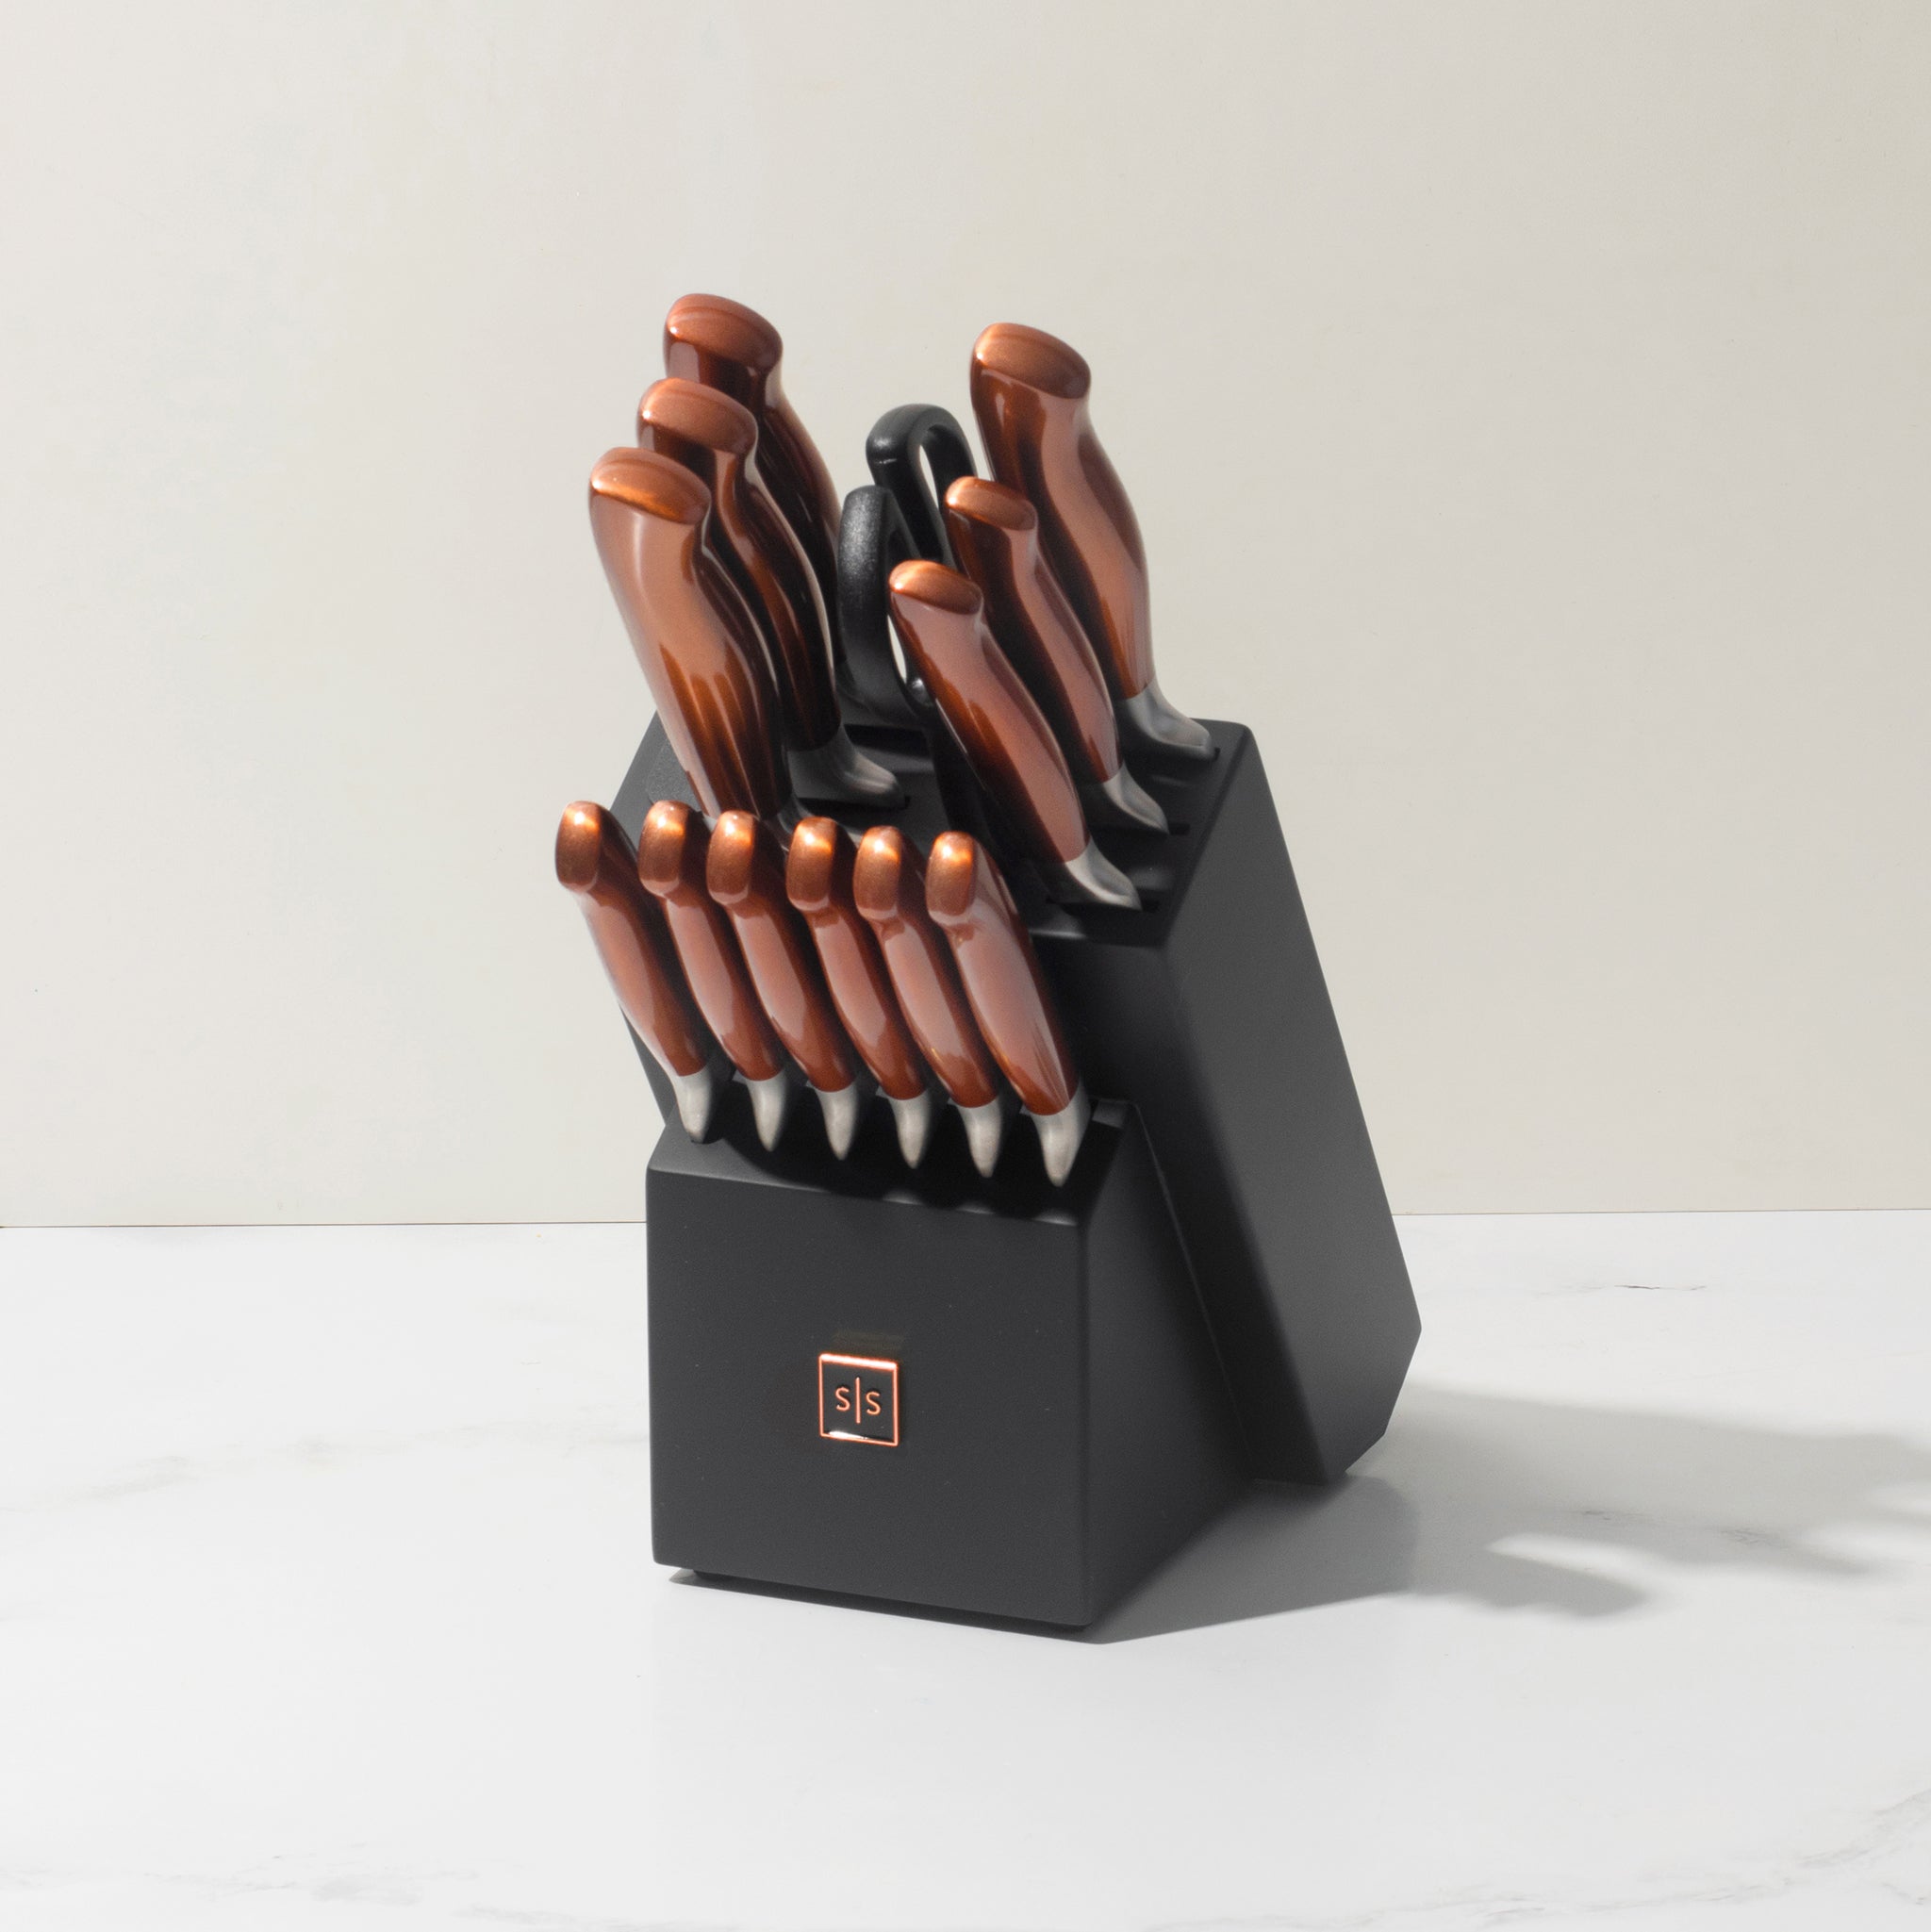 Copper Knife Set with Self-Sharpening Block - Styled Settings